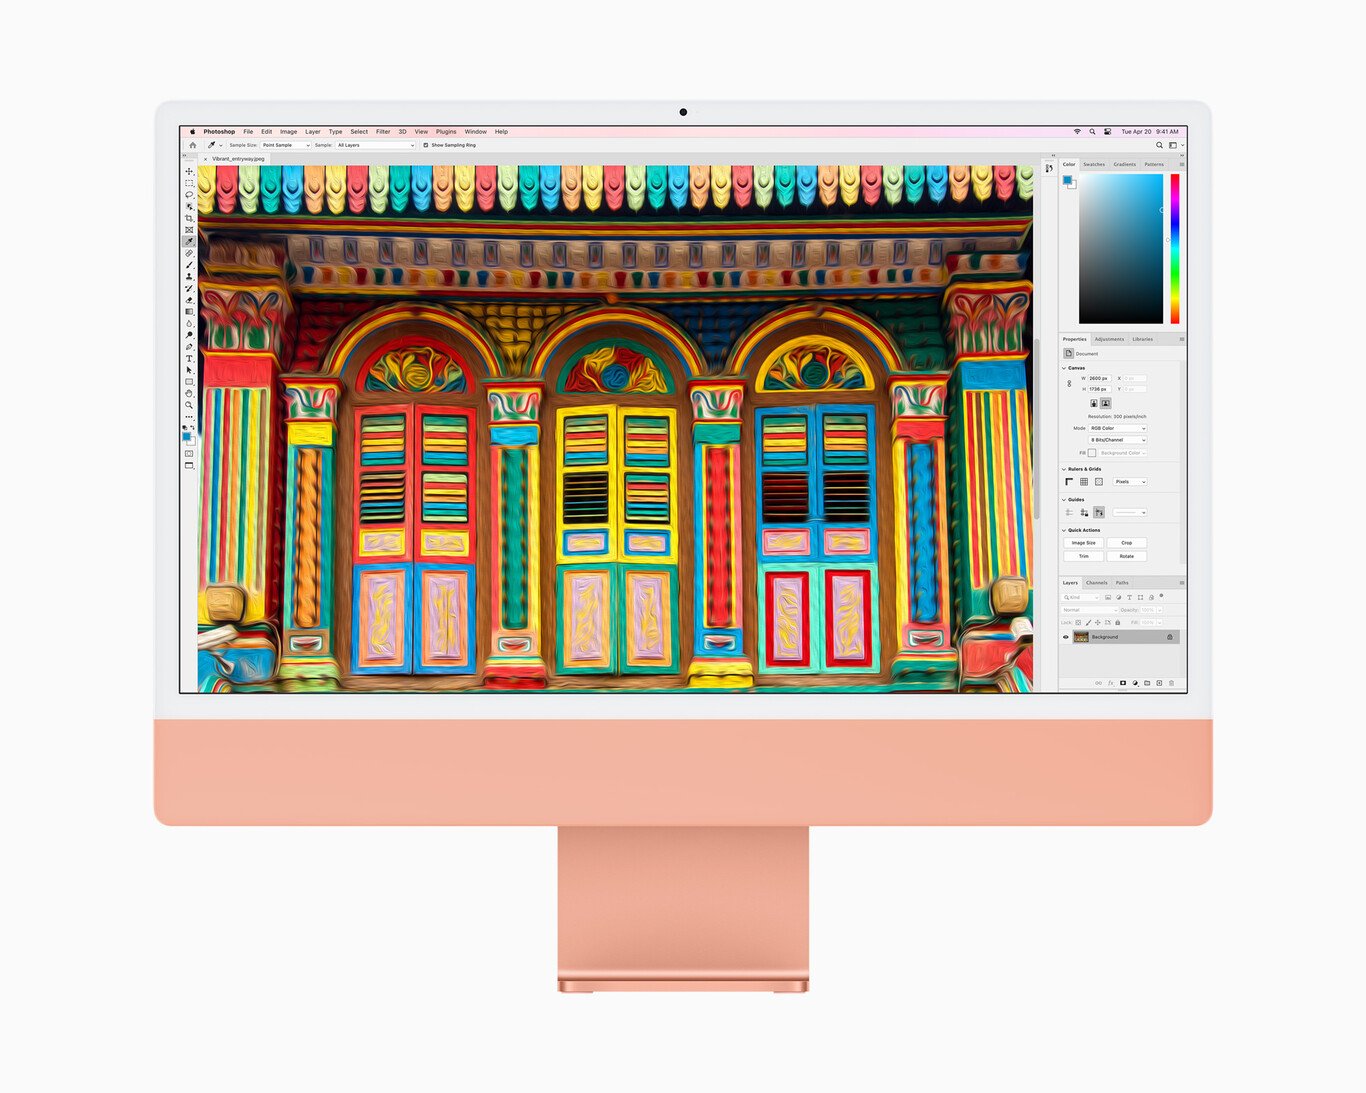 Apple launches iMac 2021 with M1 processor: Specs, price and release date